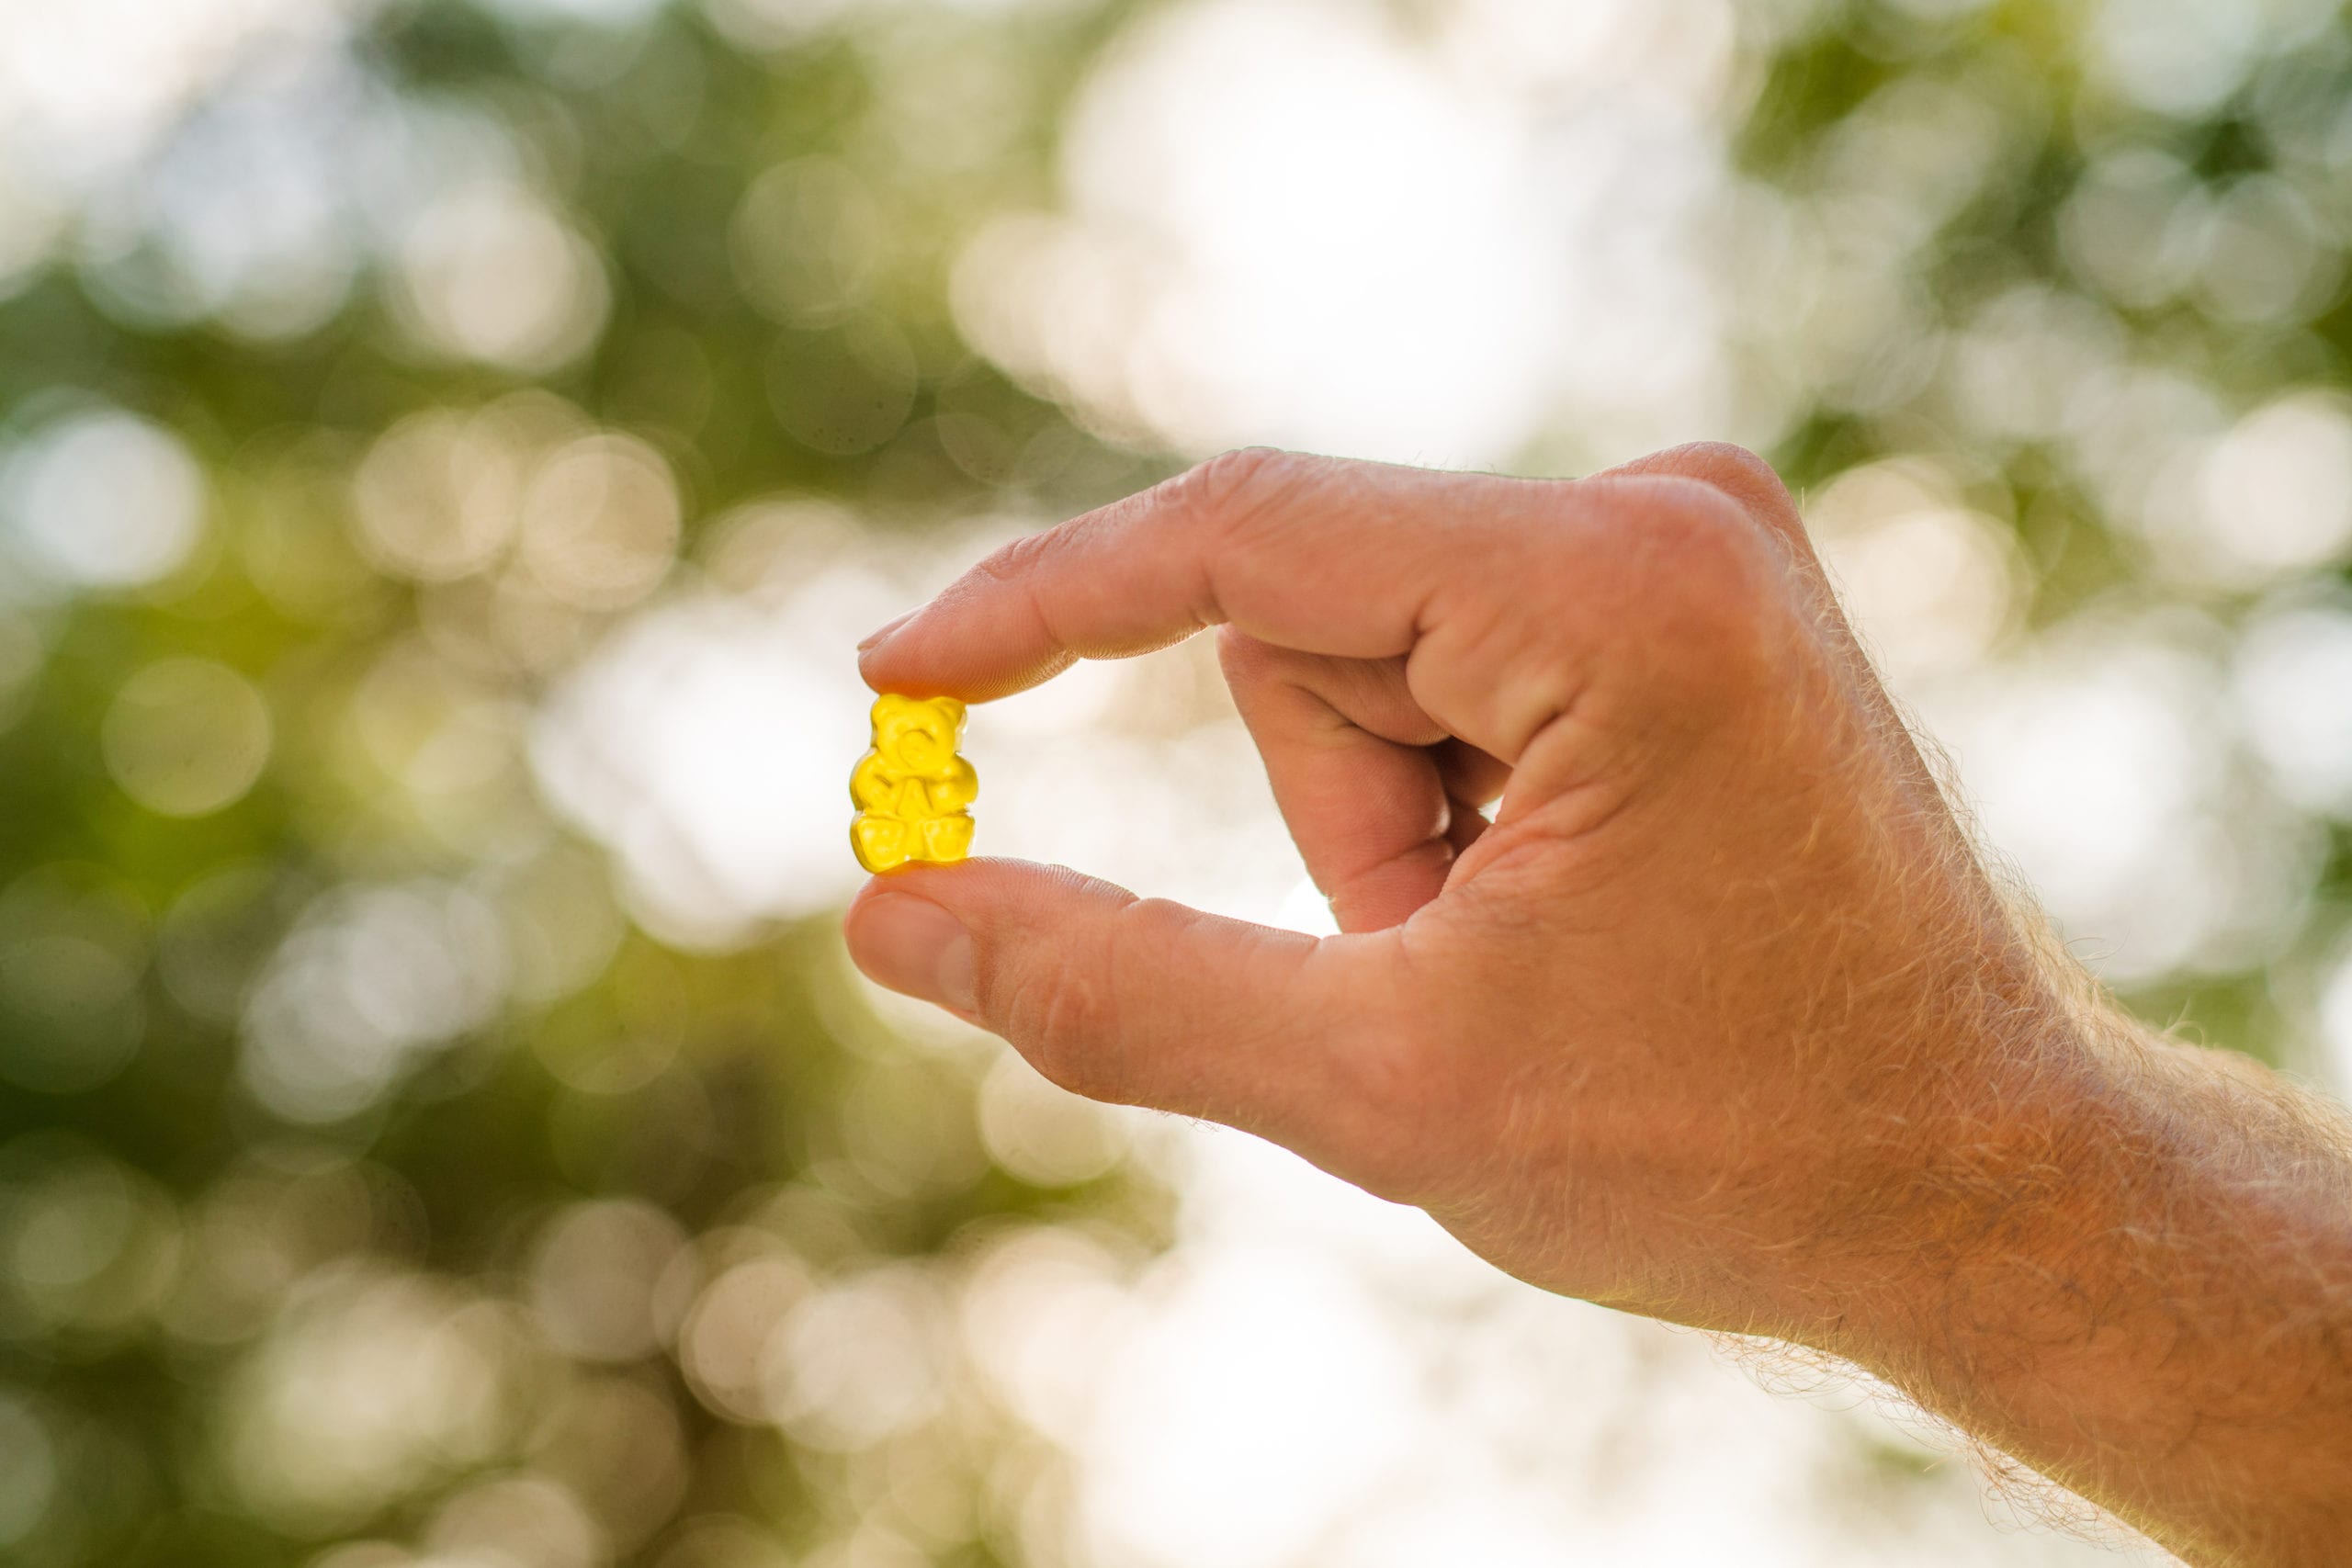 JustCBD Product Photography and Just CBD Products Man holding yellow gummy bear between thumb and forefinger